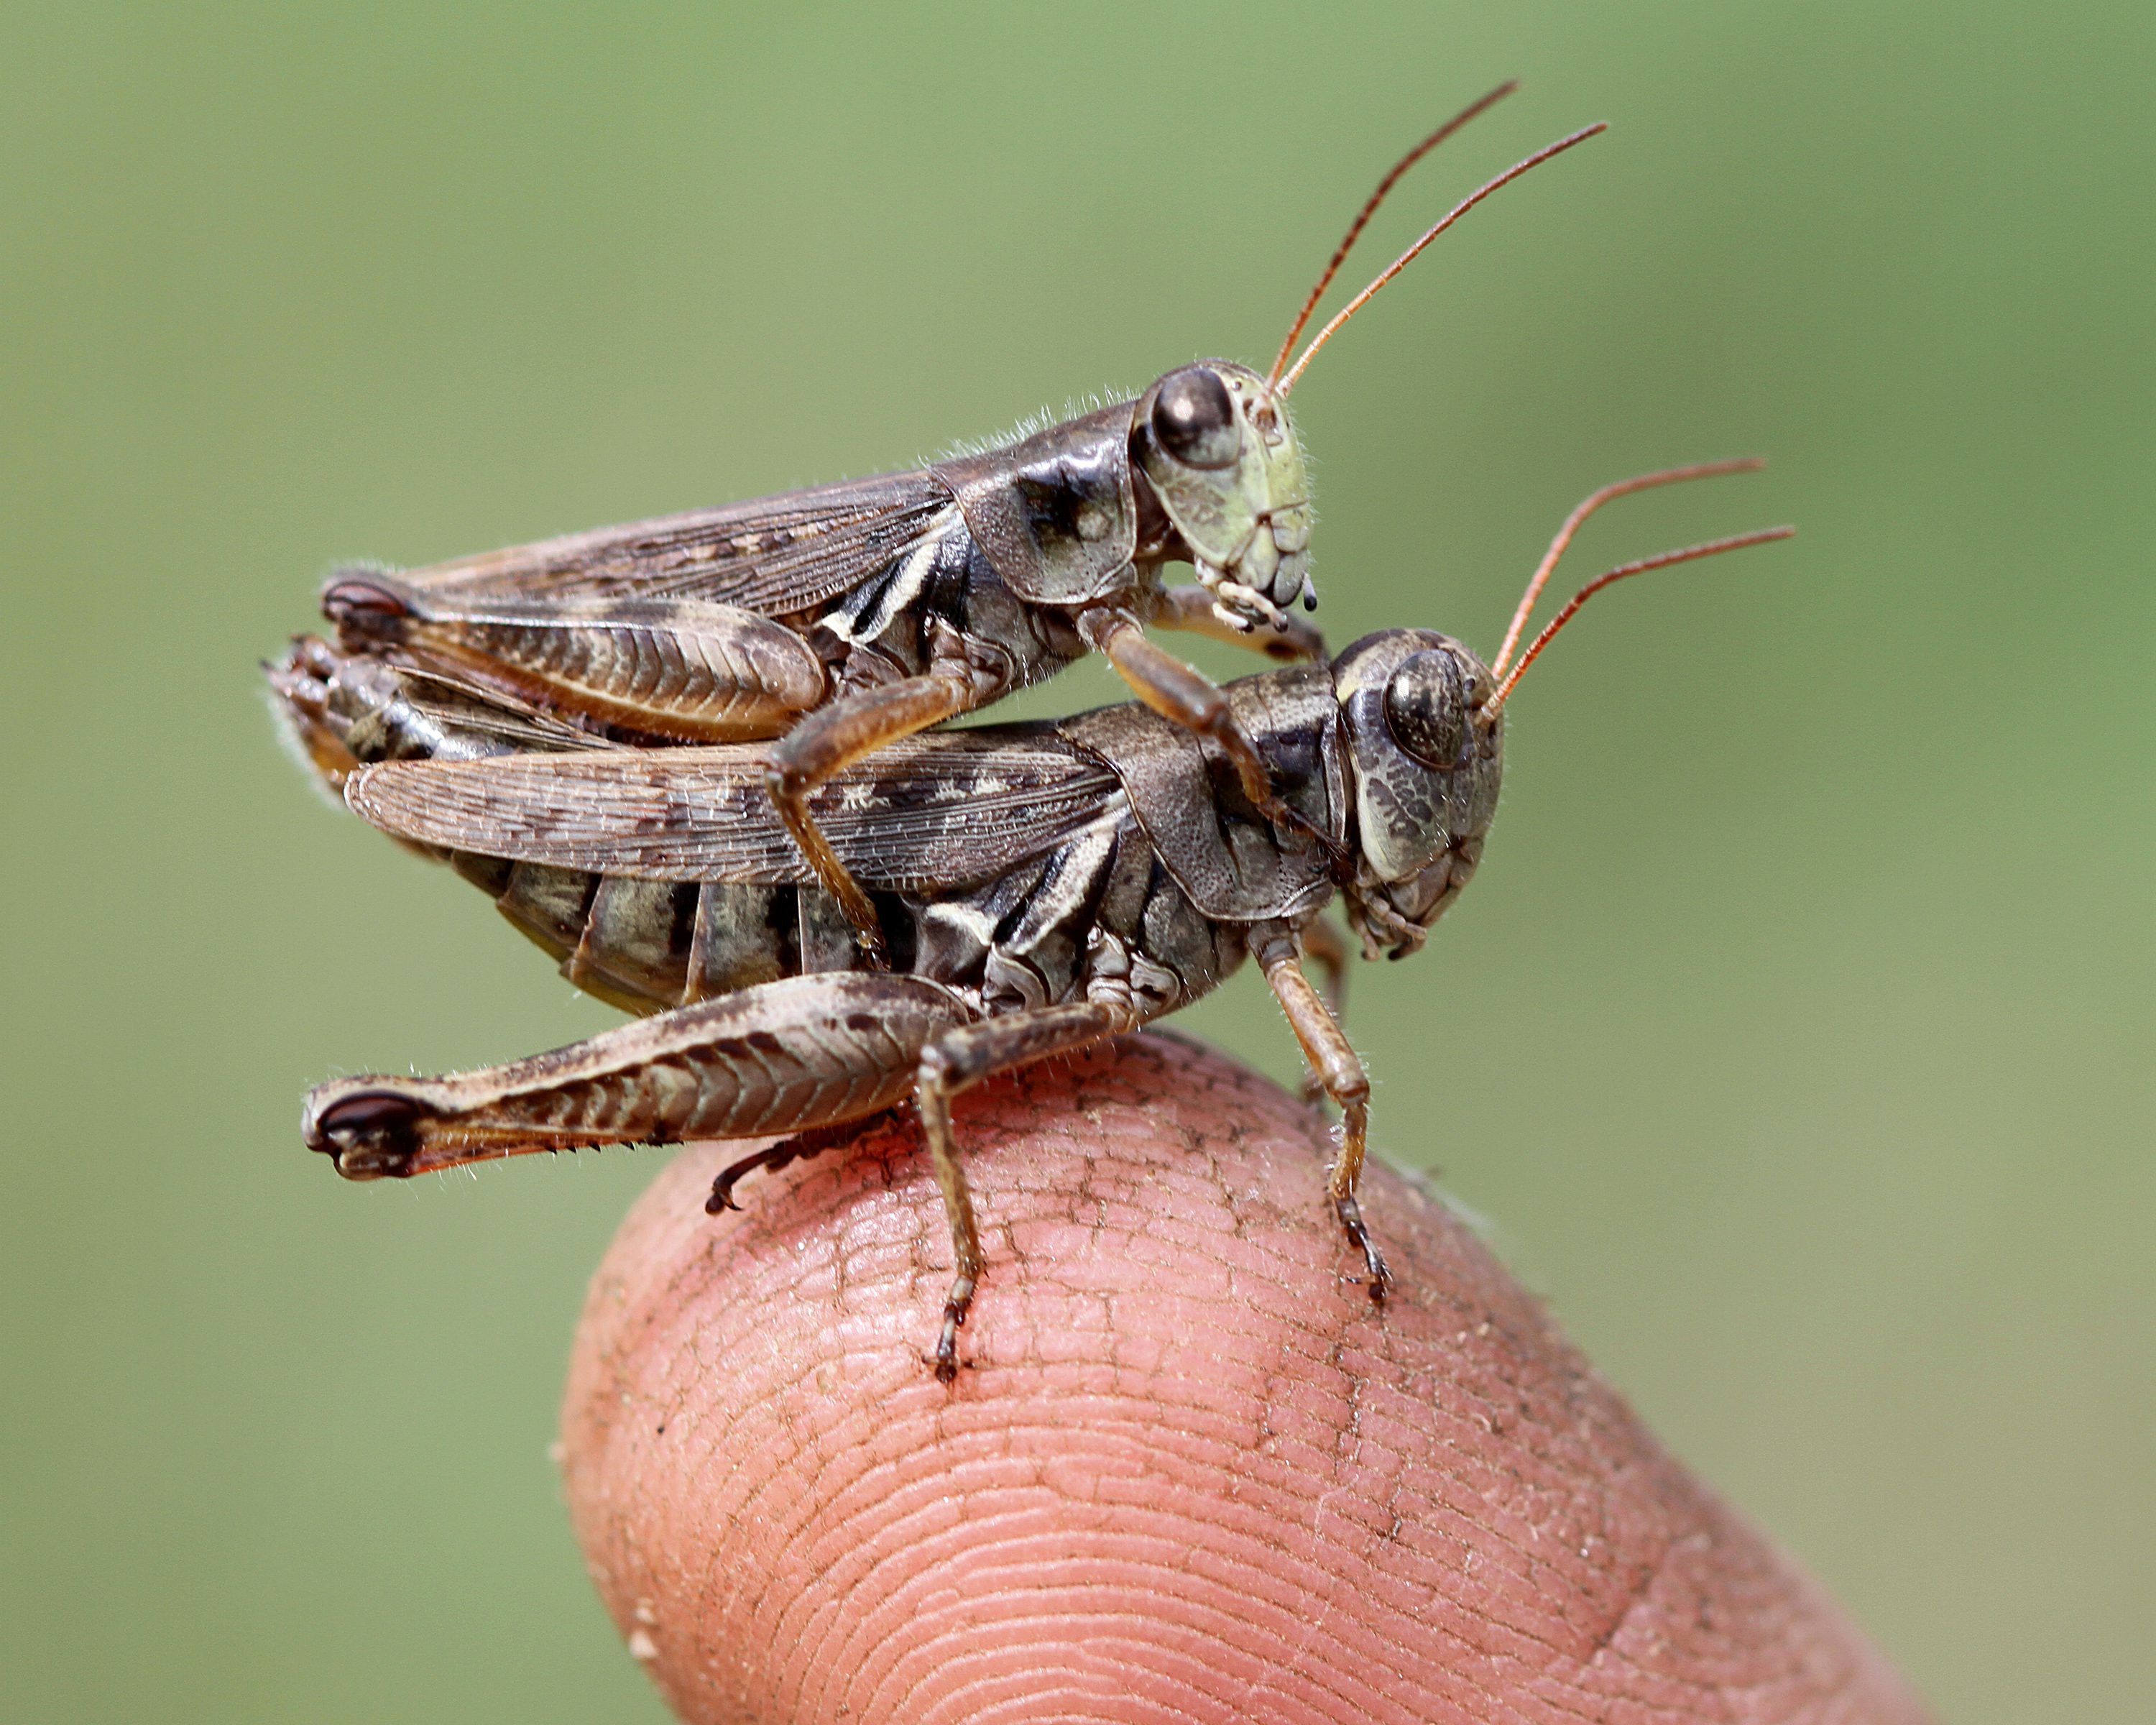 Grasshoppers – Welcome to a photographic journey through the woods ...